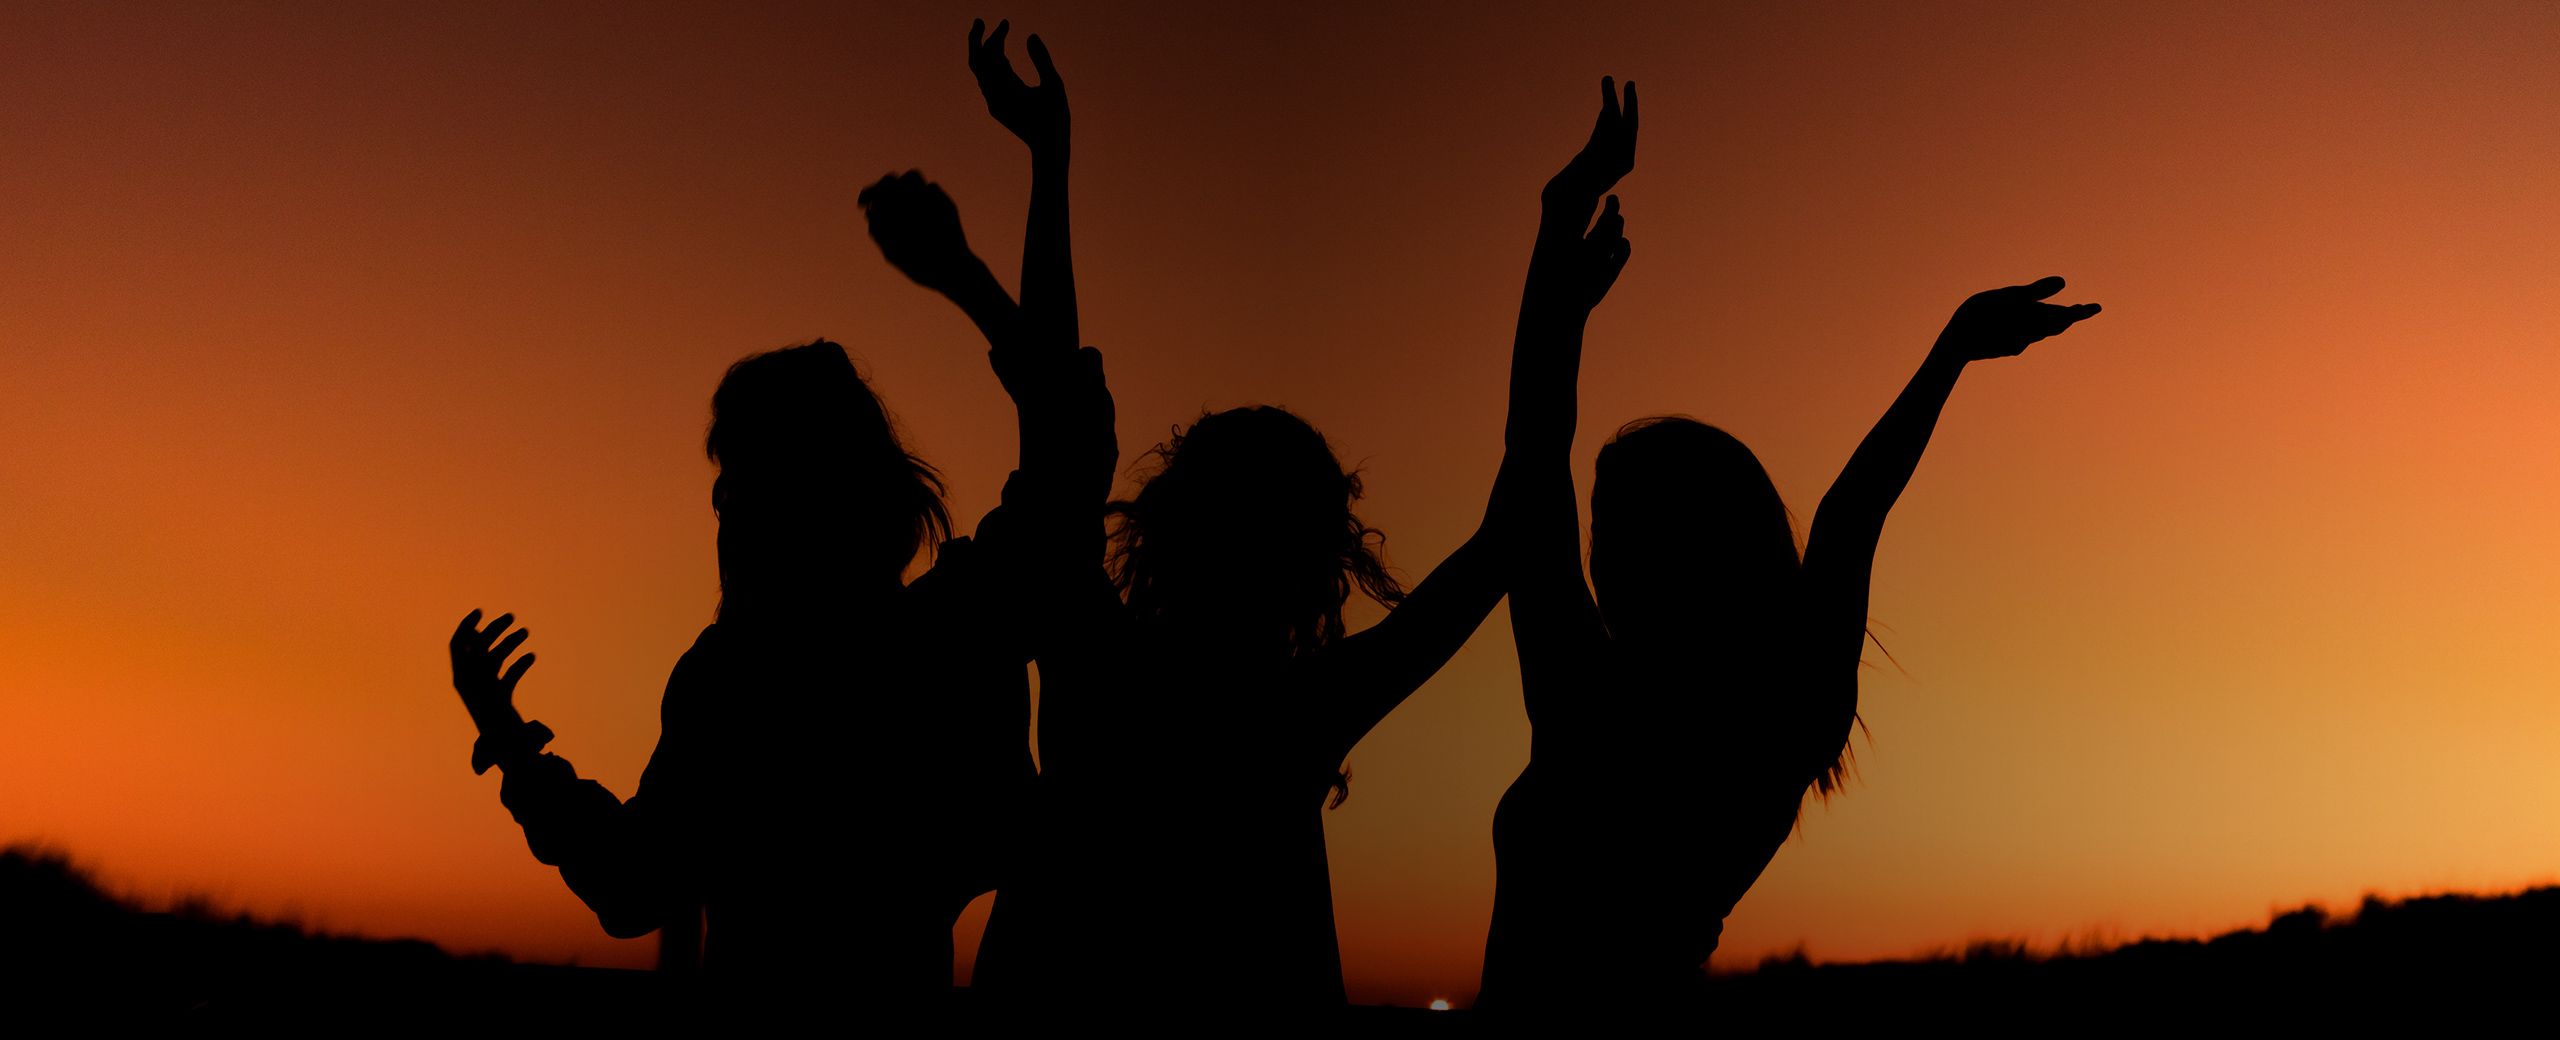 Silhouette of three women dancing with hands in the air at sunset